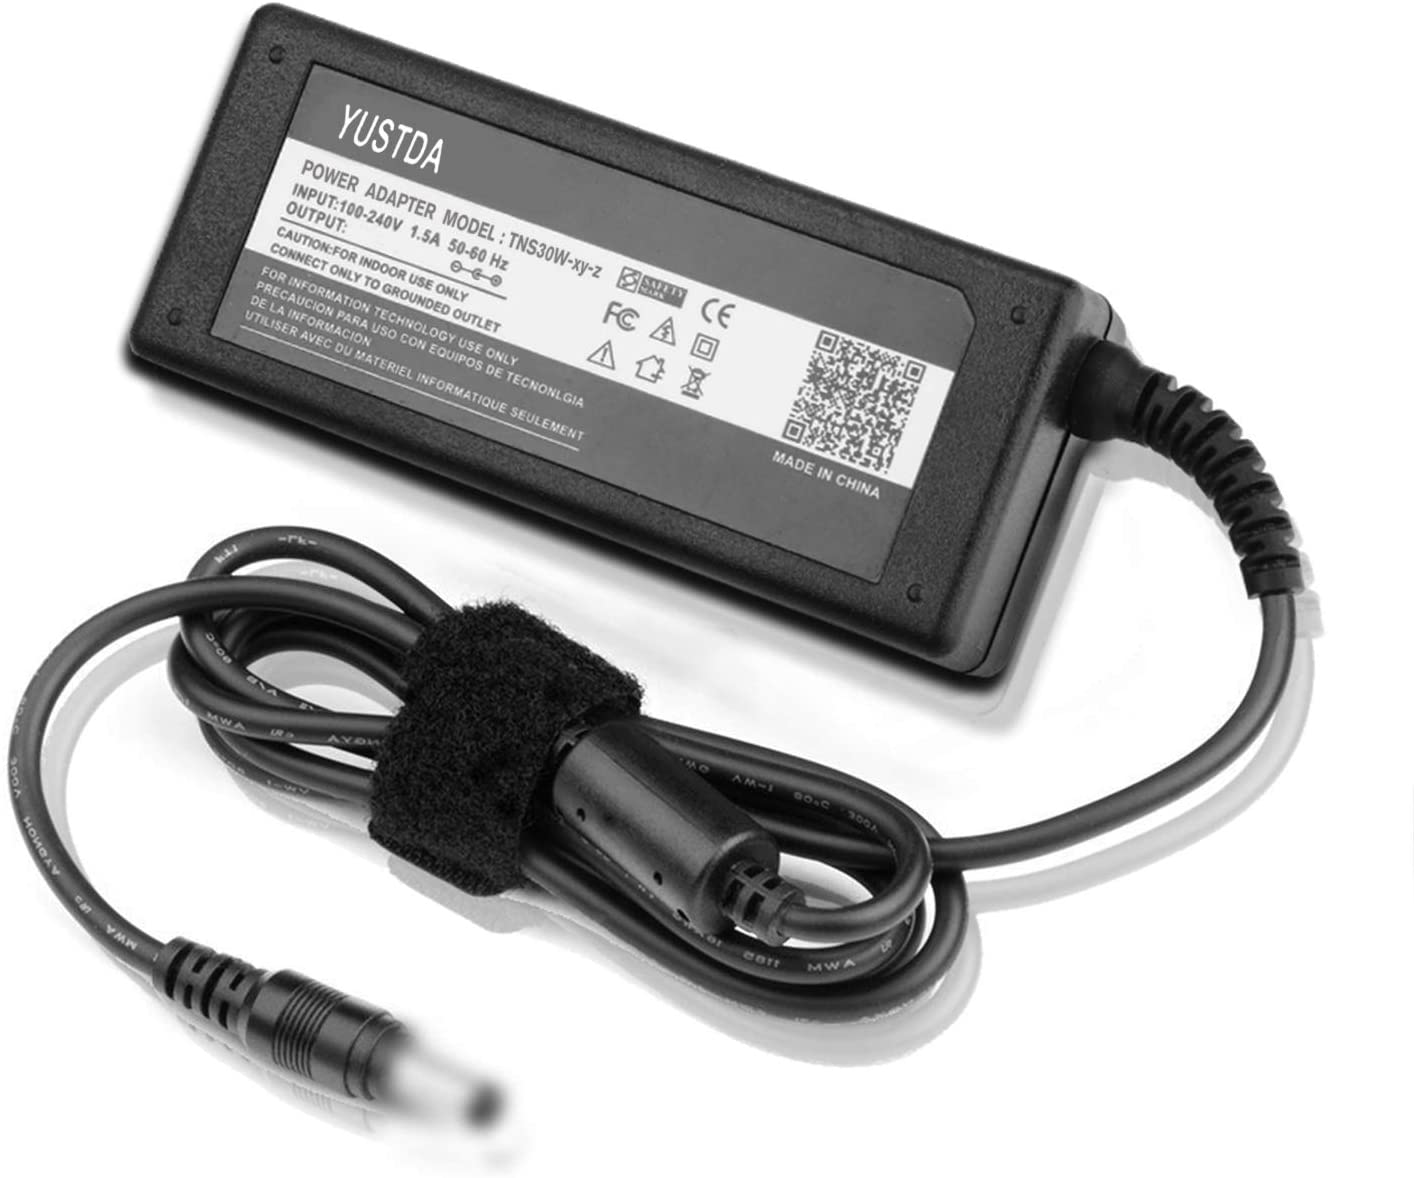 10Ft New AC/DC Adapter Replacement for ViewSonic VX2270SMH-LED VS15052, VX2370 VX2370S-LED VS14880 VX2376-smhd 23", VS13814, VX2253mh-LED, V3D245 VS13777 VX2776-smhd, APD Asian Power Devices DA-40A19 - image 2 of 5